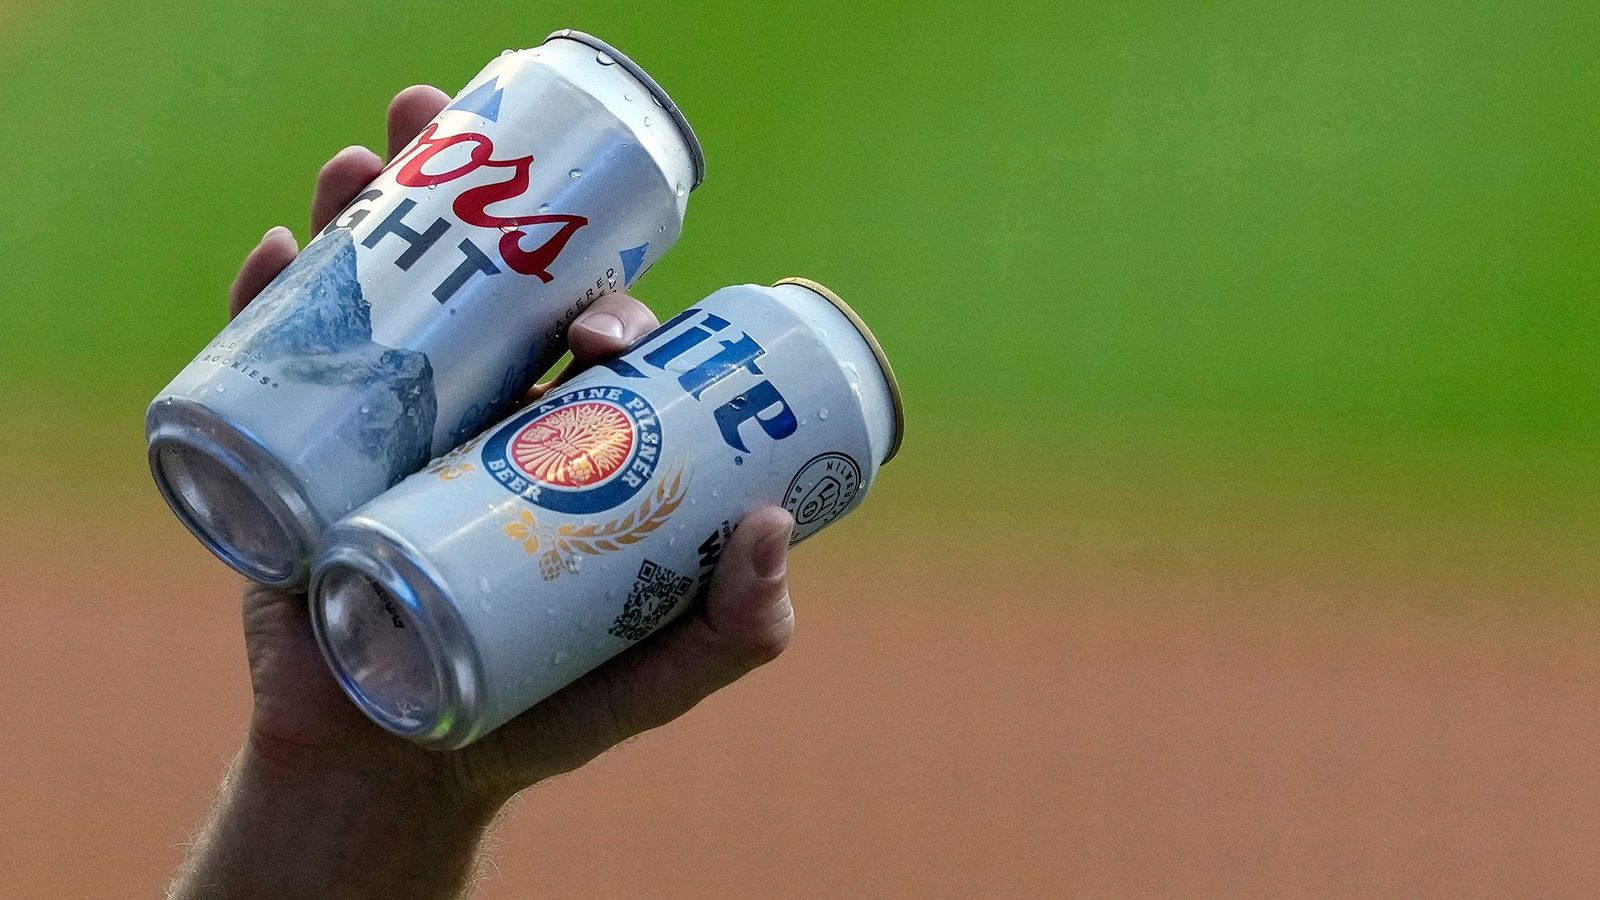 Coors and Miller Light cans at a baseball game